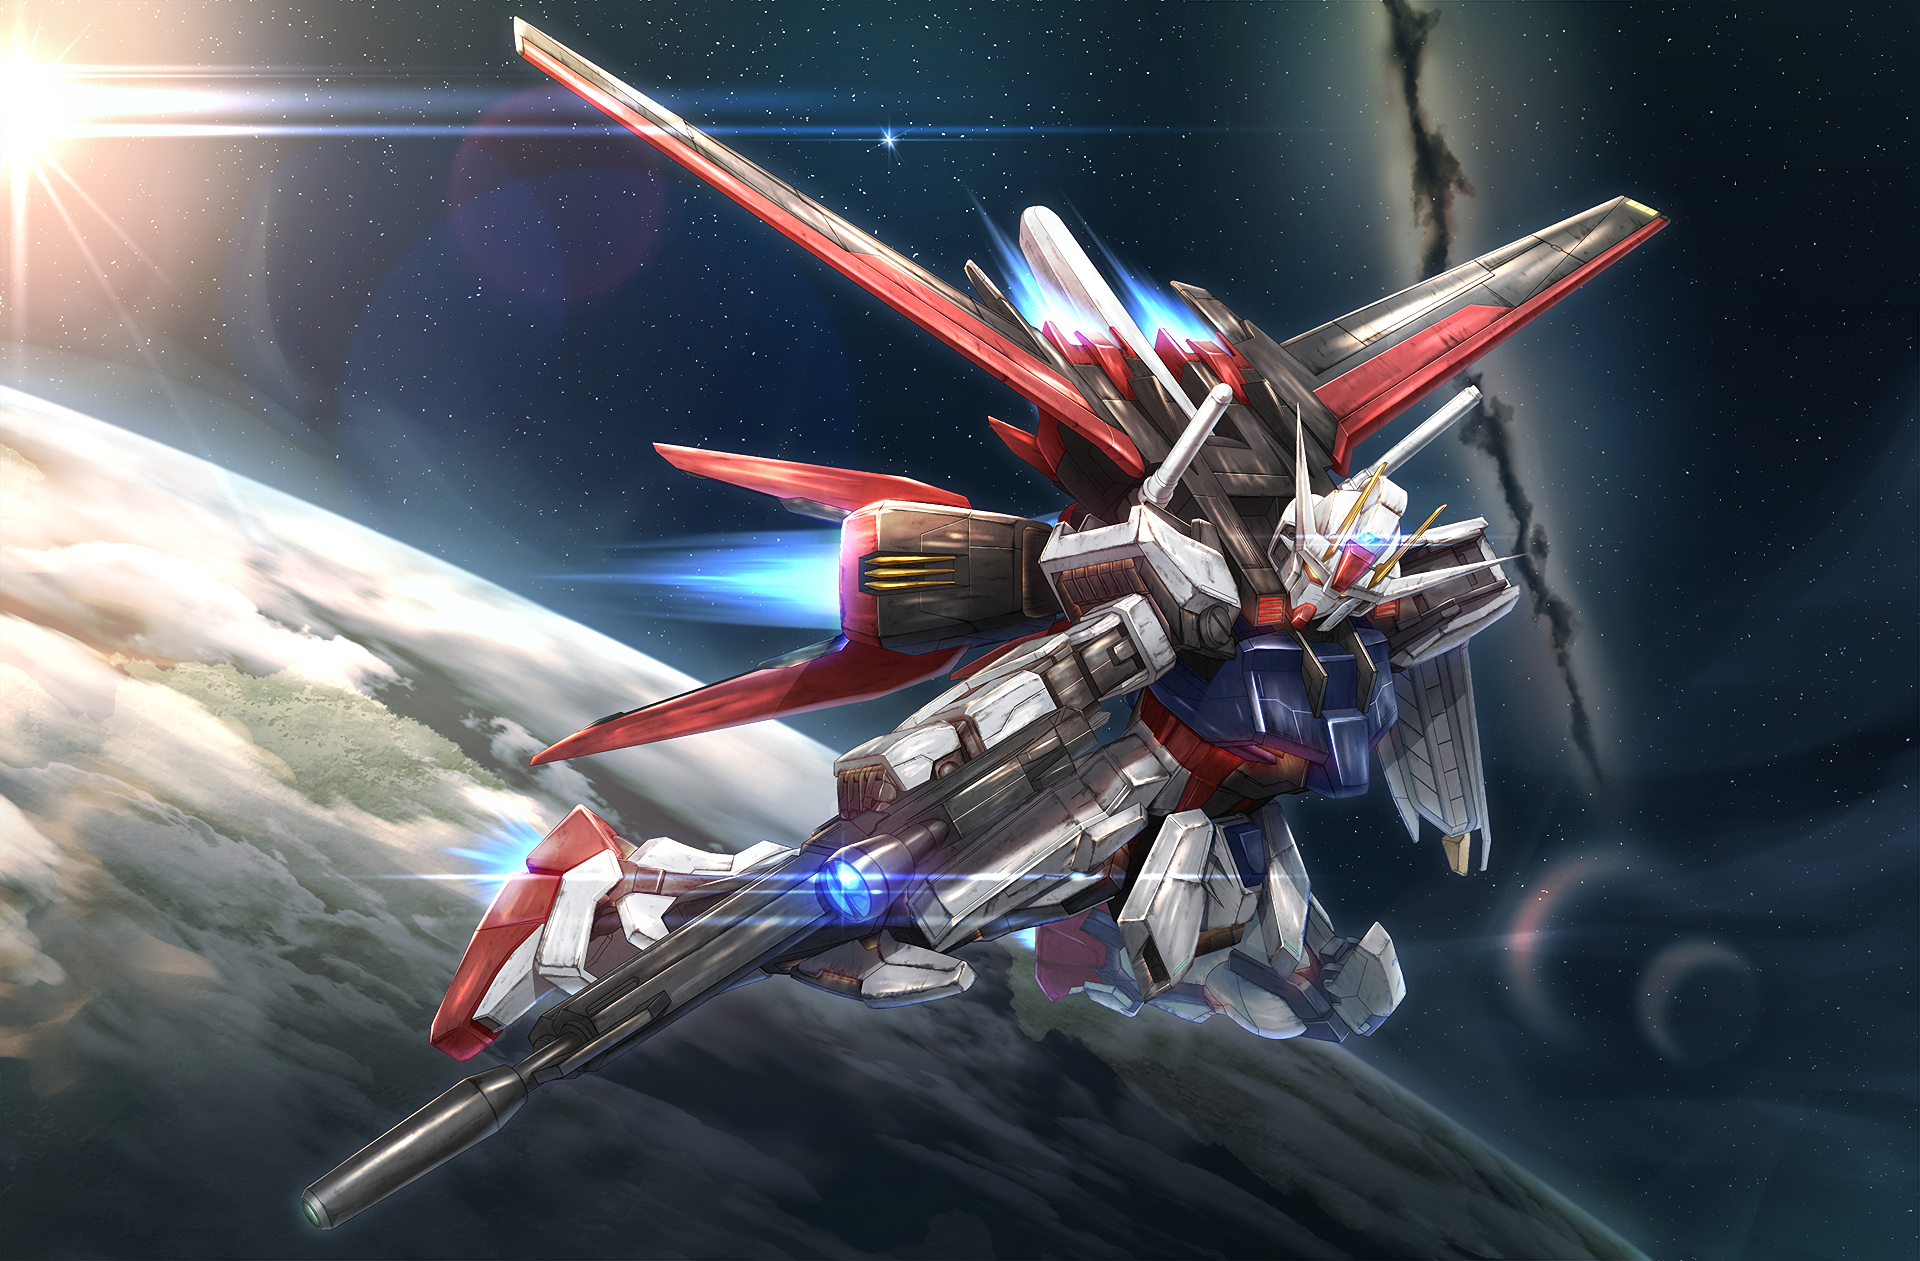 Mobile Suit Gundam Seed HD Wallpaper | Background Image | 1920x1261 | ID:880317 - Wallpaper Abyss